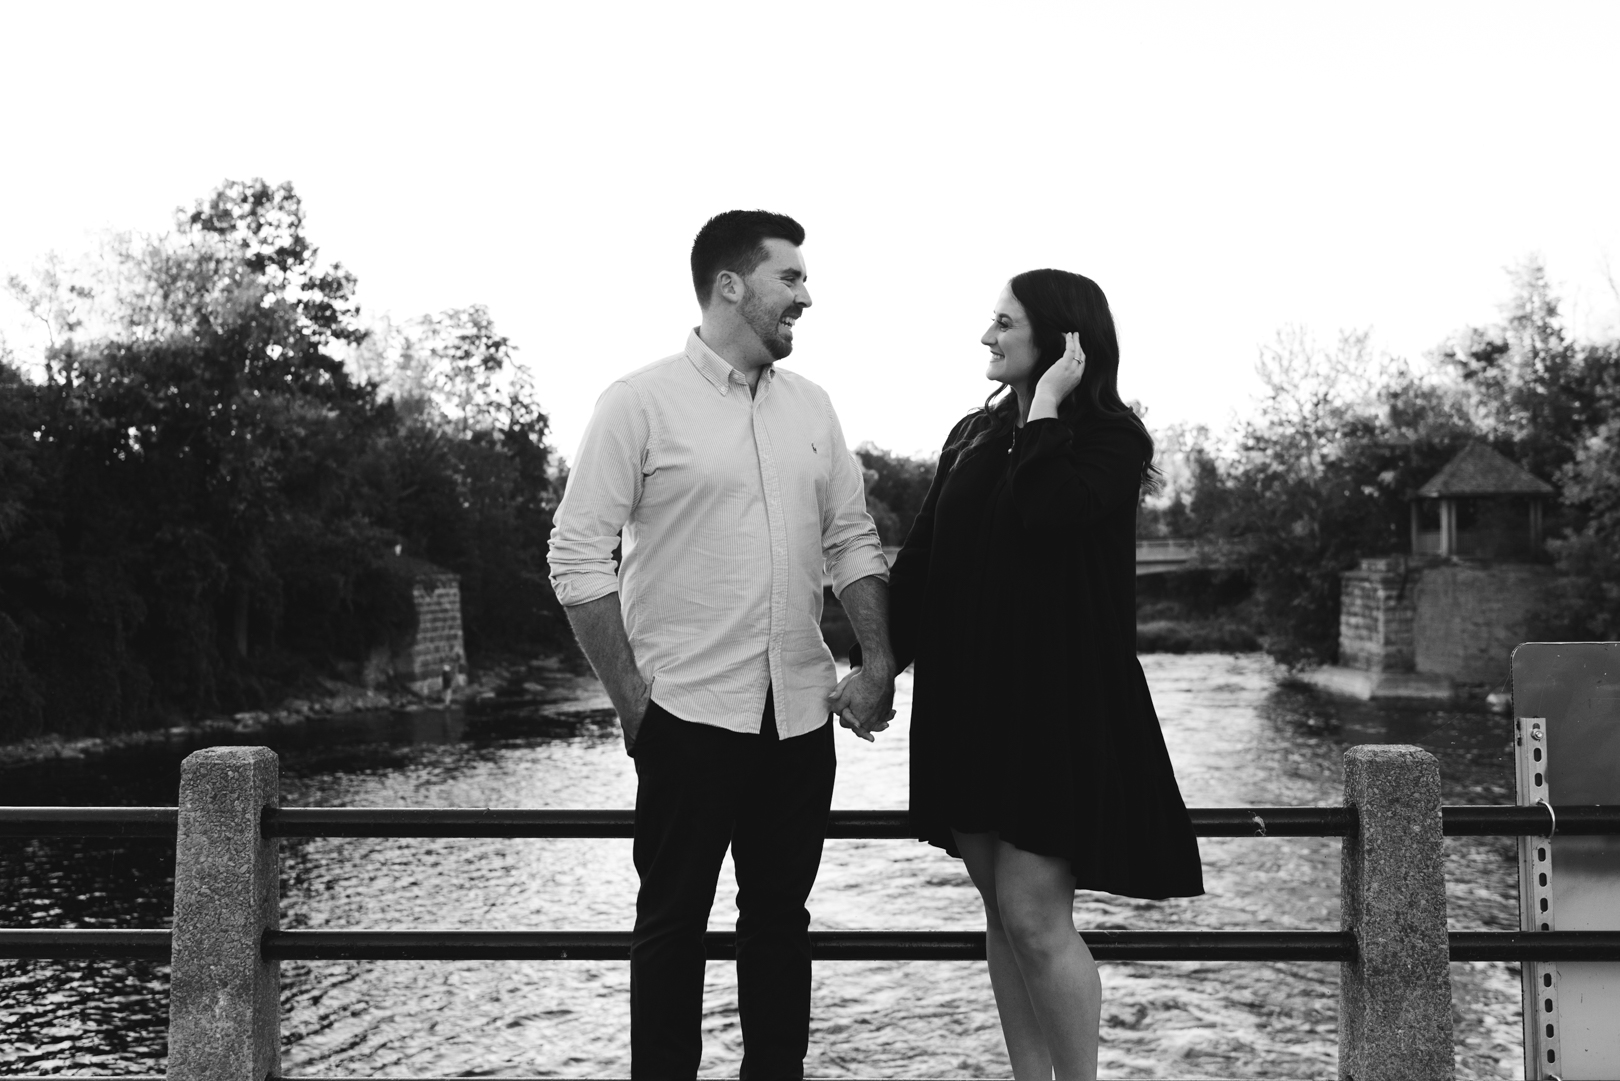 Engaged couple standing on a bridge holding hands in black and white